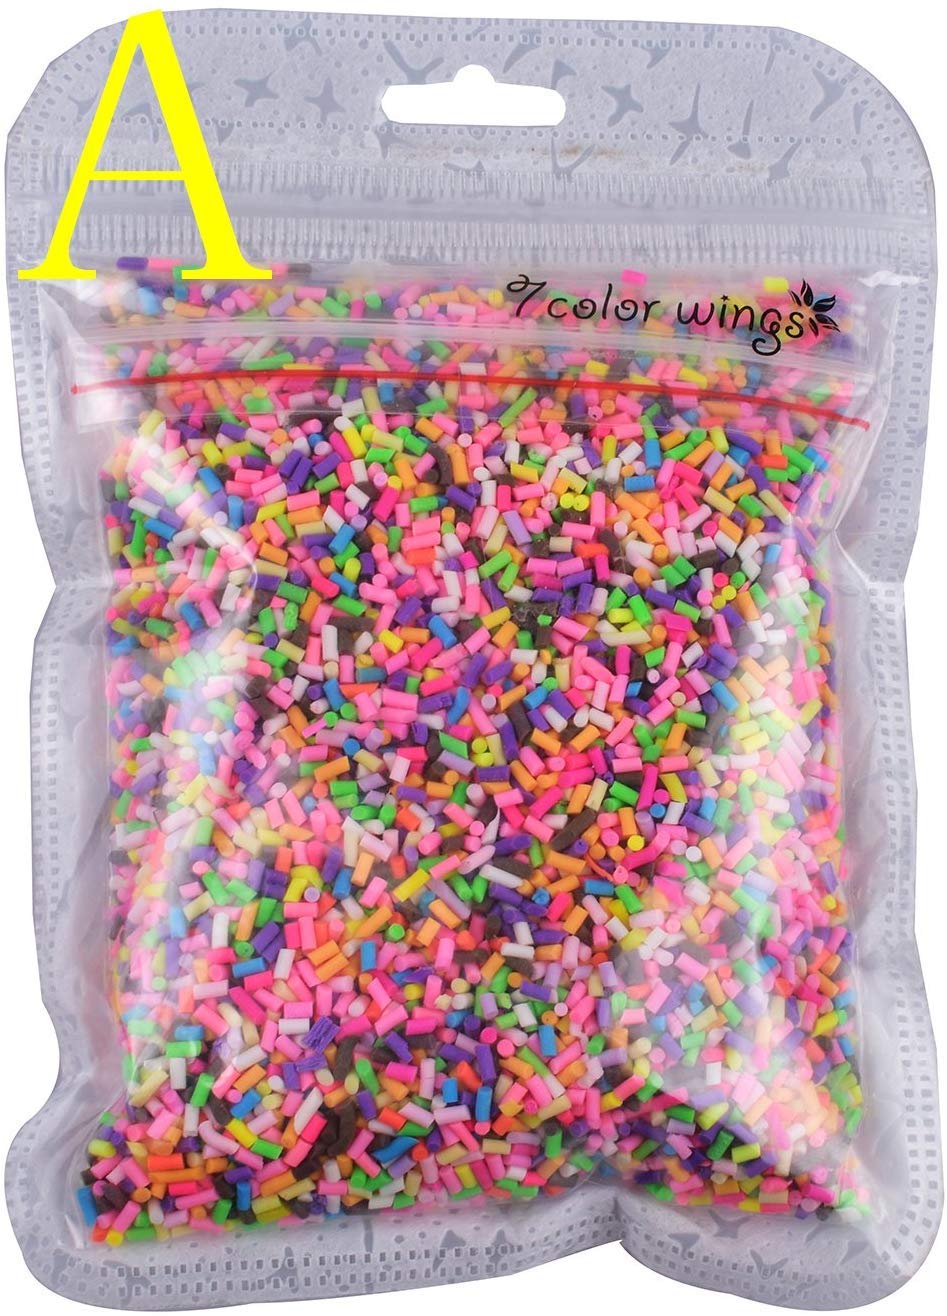 Book Cover Colorful Sprinkles Decorations Simulation DIY Polymer Clay Candy Sweets Sugar Simulation Food 100g (A)